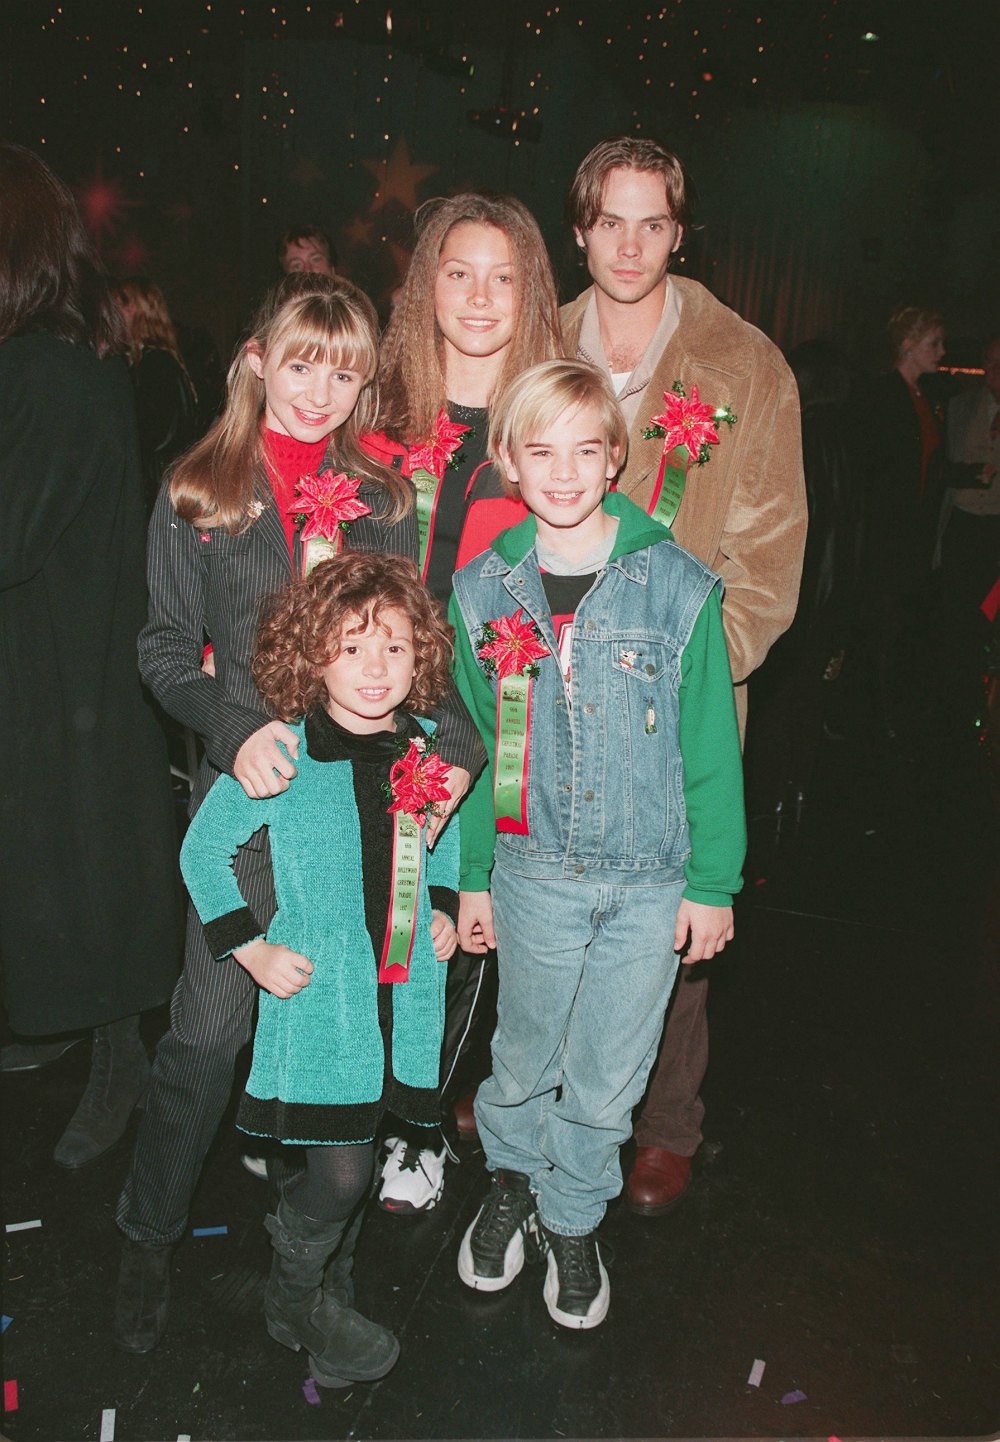 The '7th Heaven' cast in 1999.